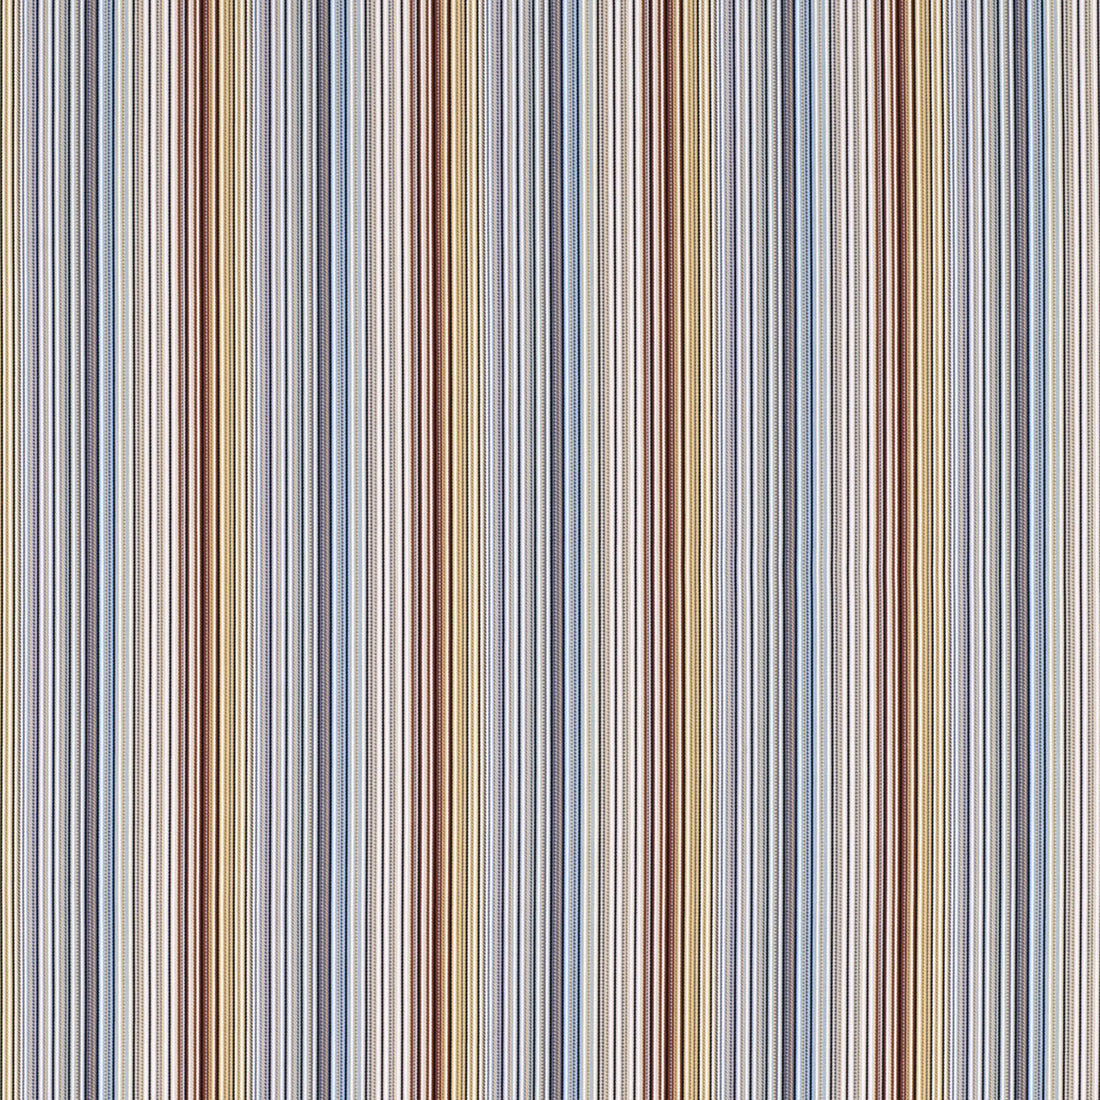 Jenkins fabric in 148 color - pattern 36163.615.0 - by Kravet Couture in the Missoni Home collection